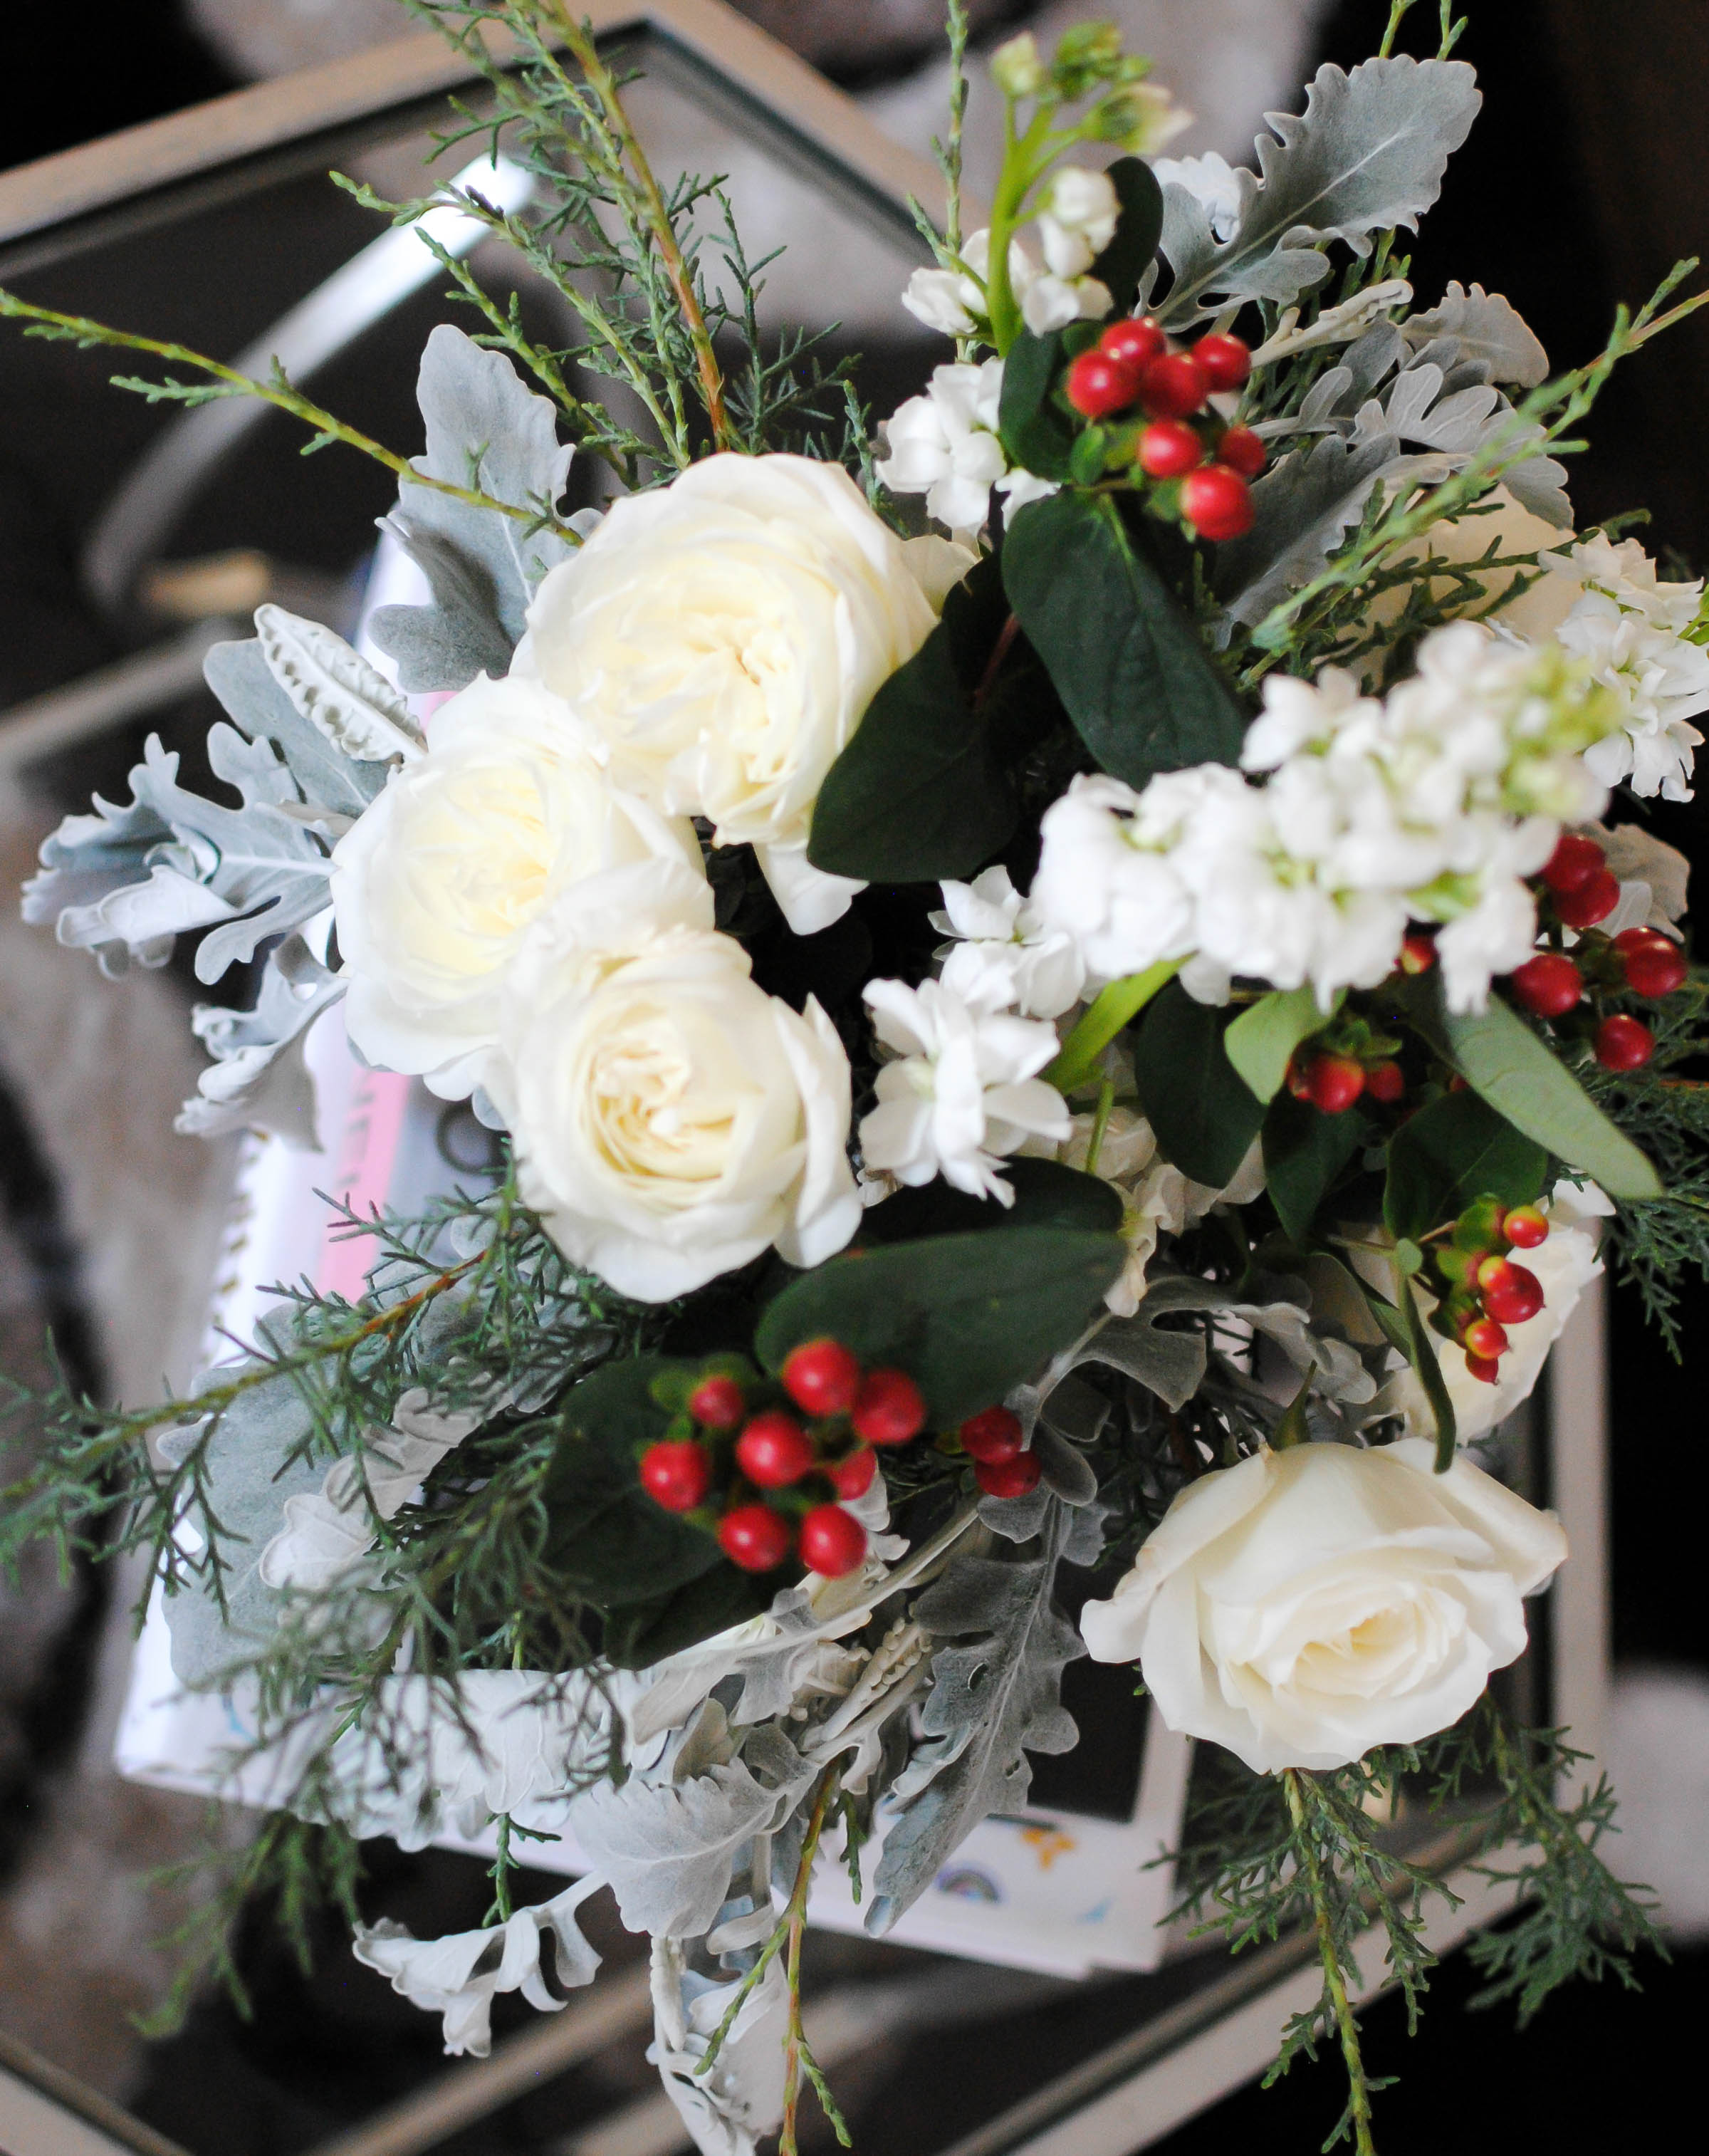 vanessa-lambert-blogger-behind-what-would-v-wear-attends-alices-table-holiday-flower-arranging-class-in-oak-brook_19